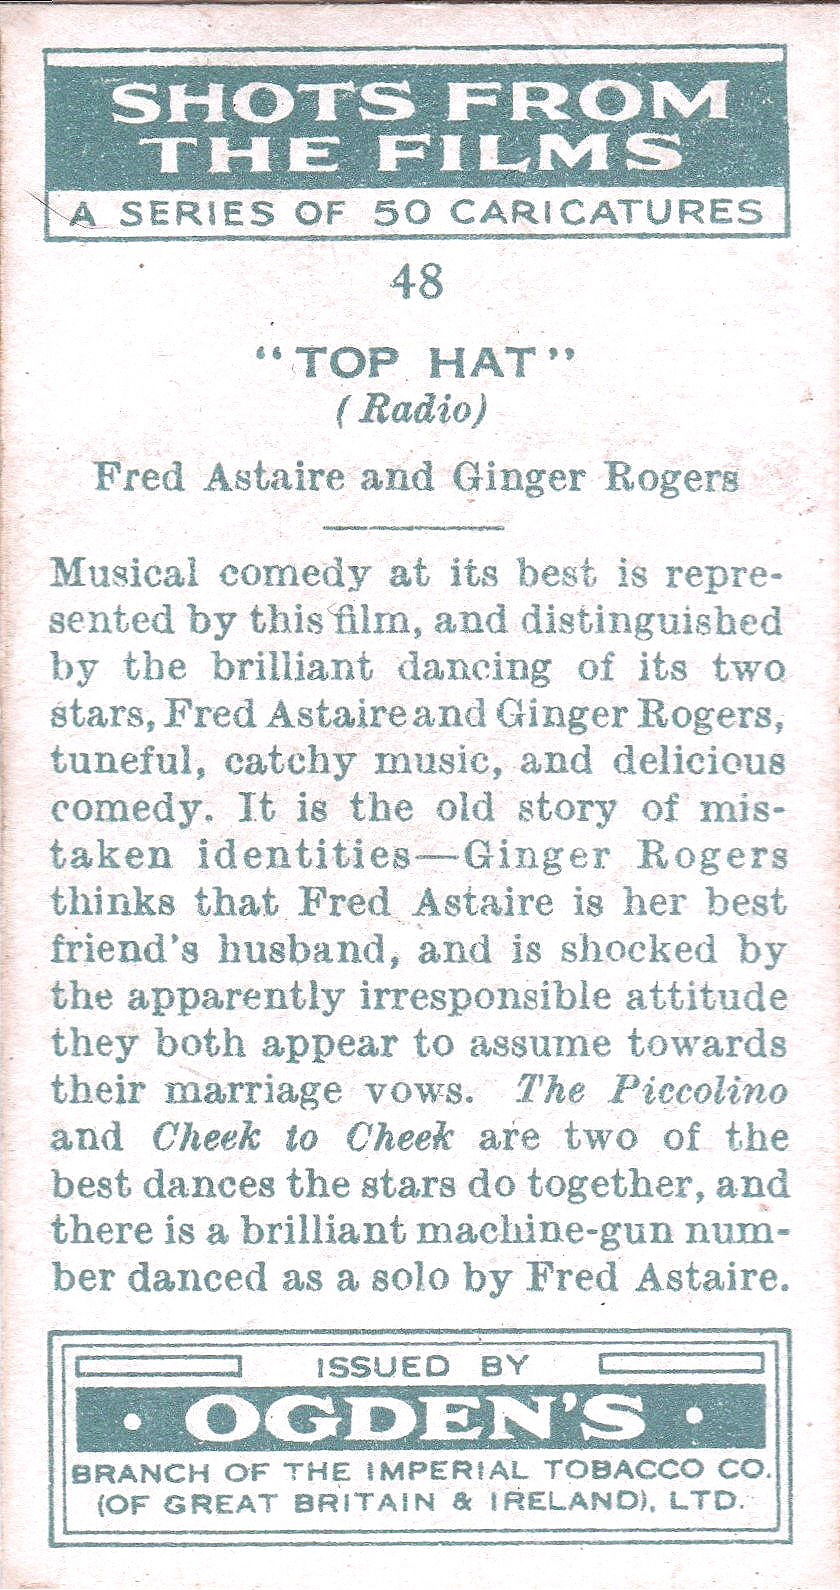 " TOP HAT " FRED ASTAIRE - GINGERS ROGERS